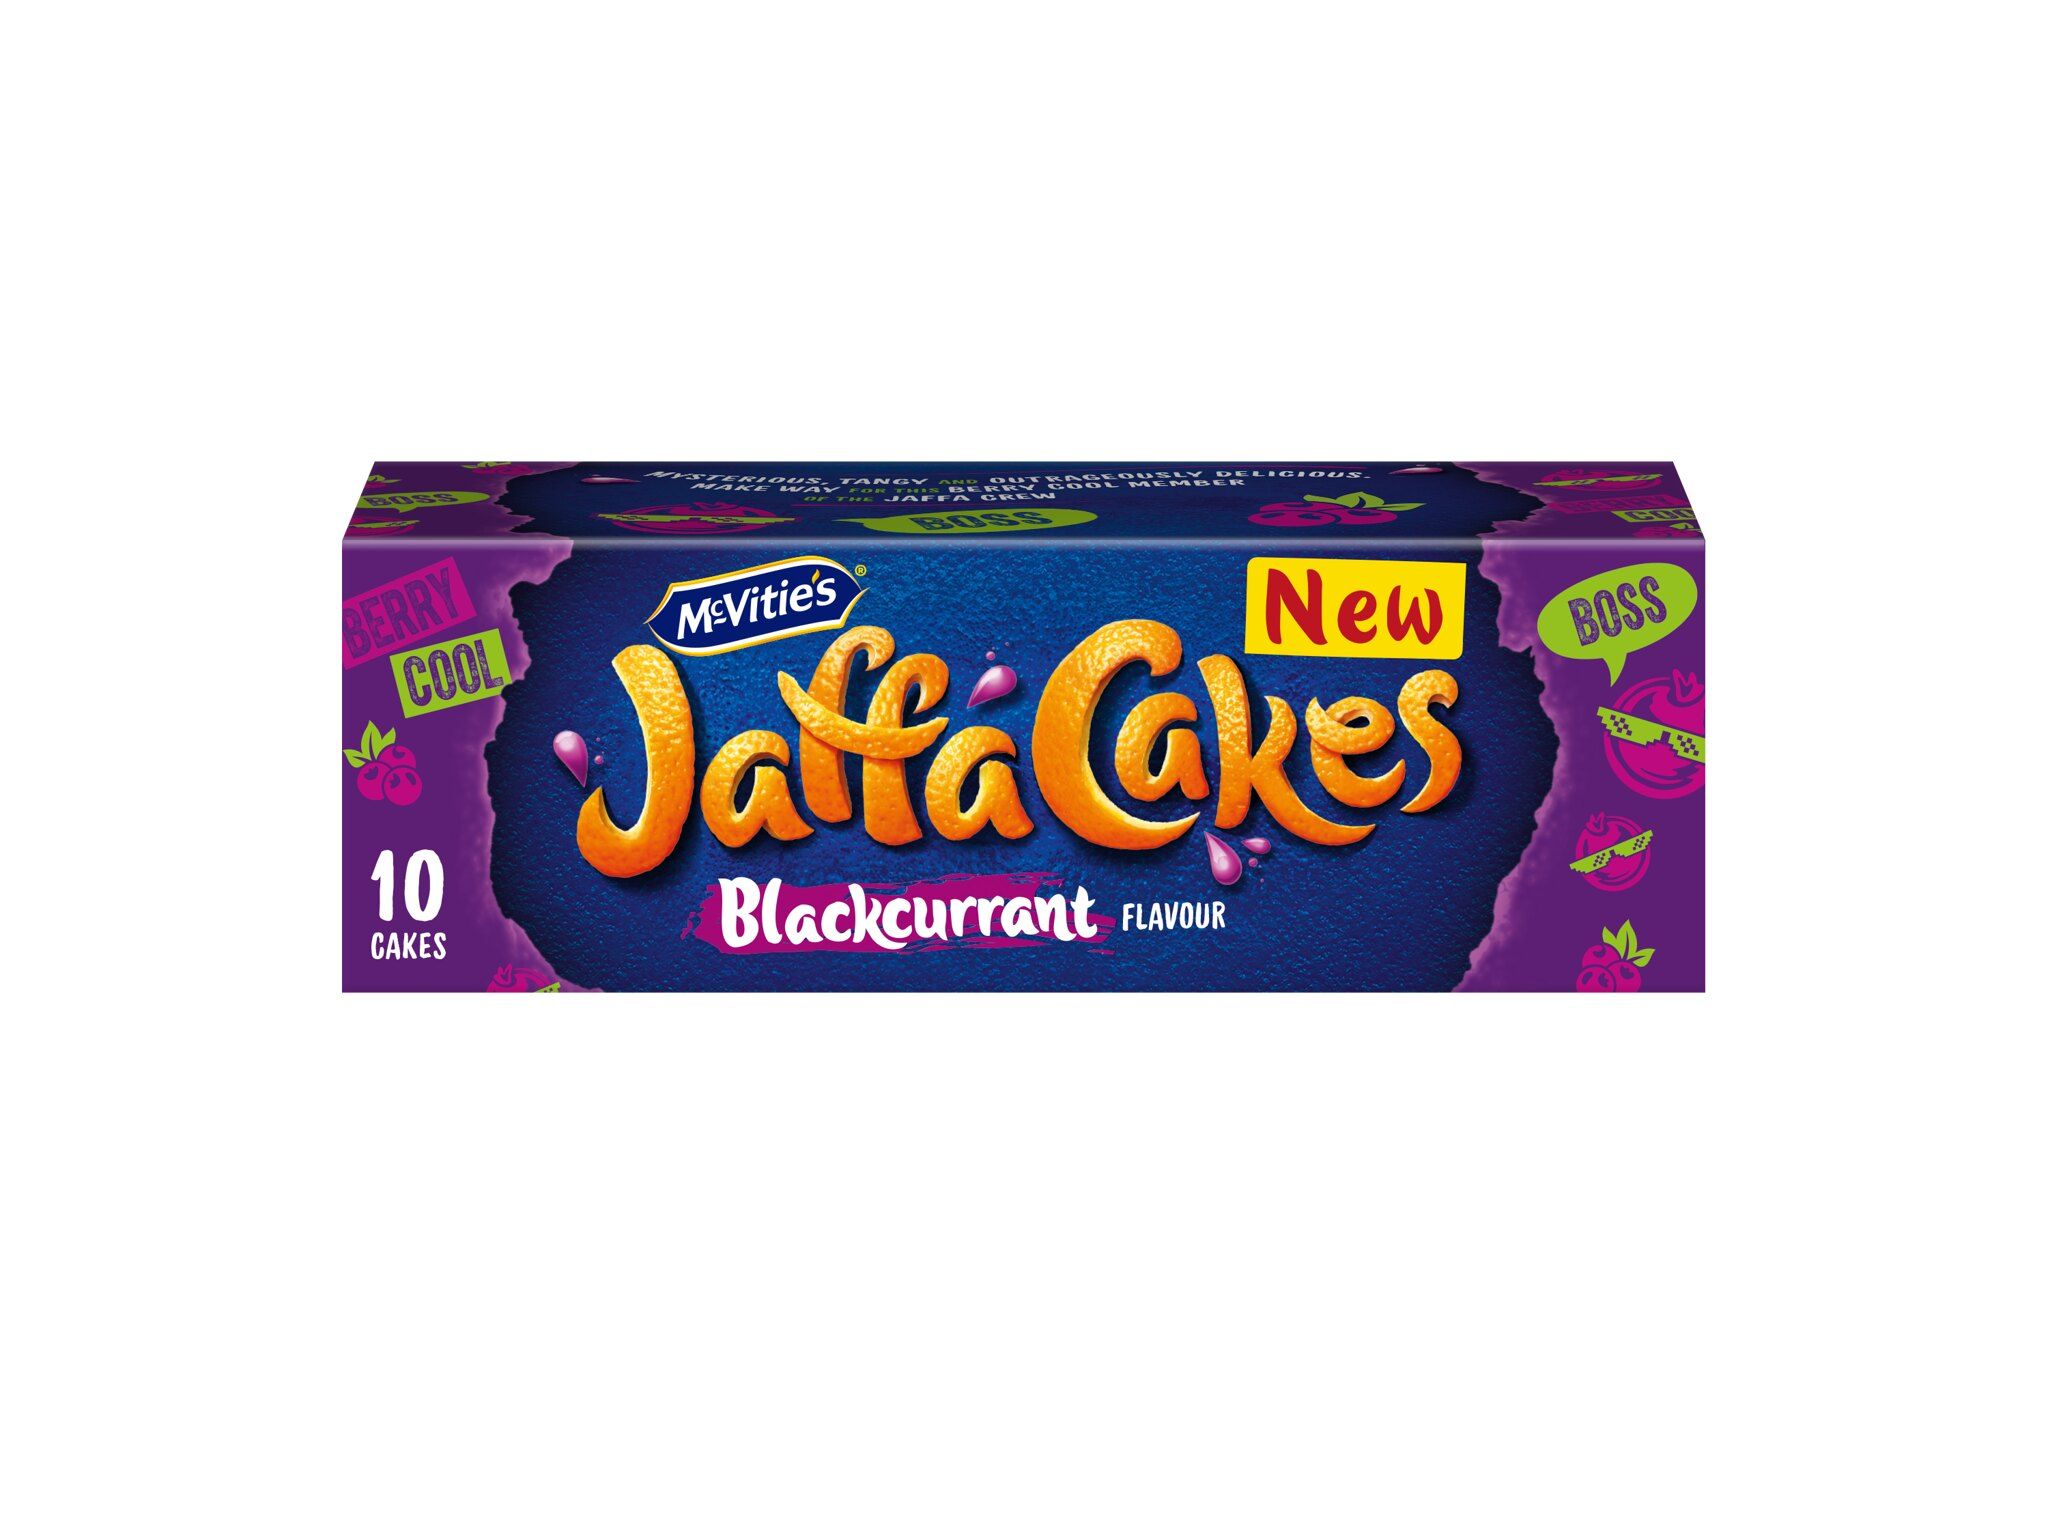 Pass notes No 2,853: Jaffa Cakes | Food & drink industry | The Guardian